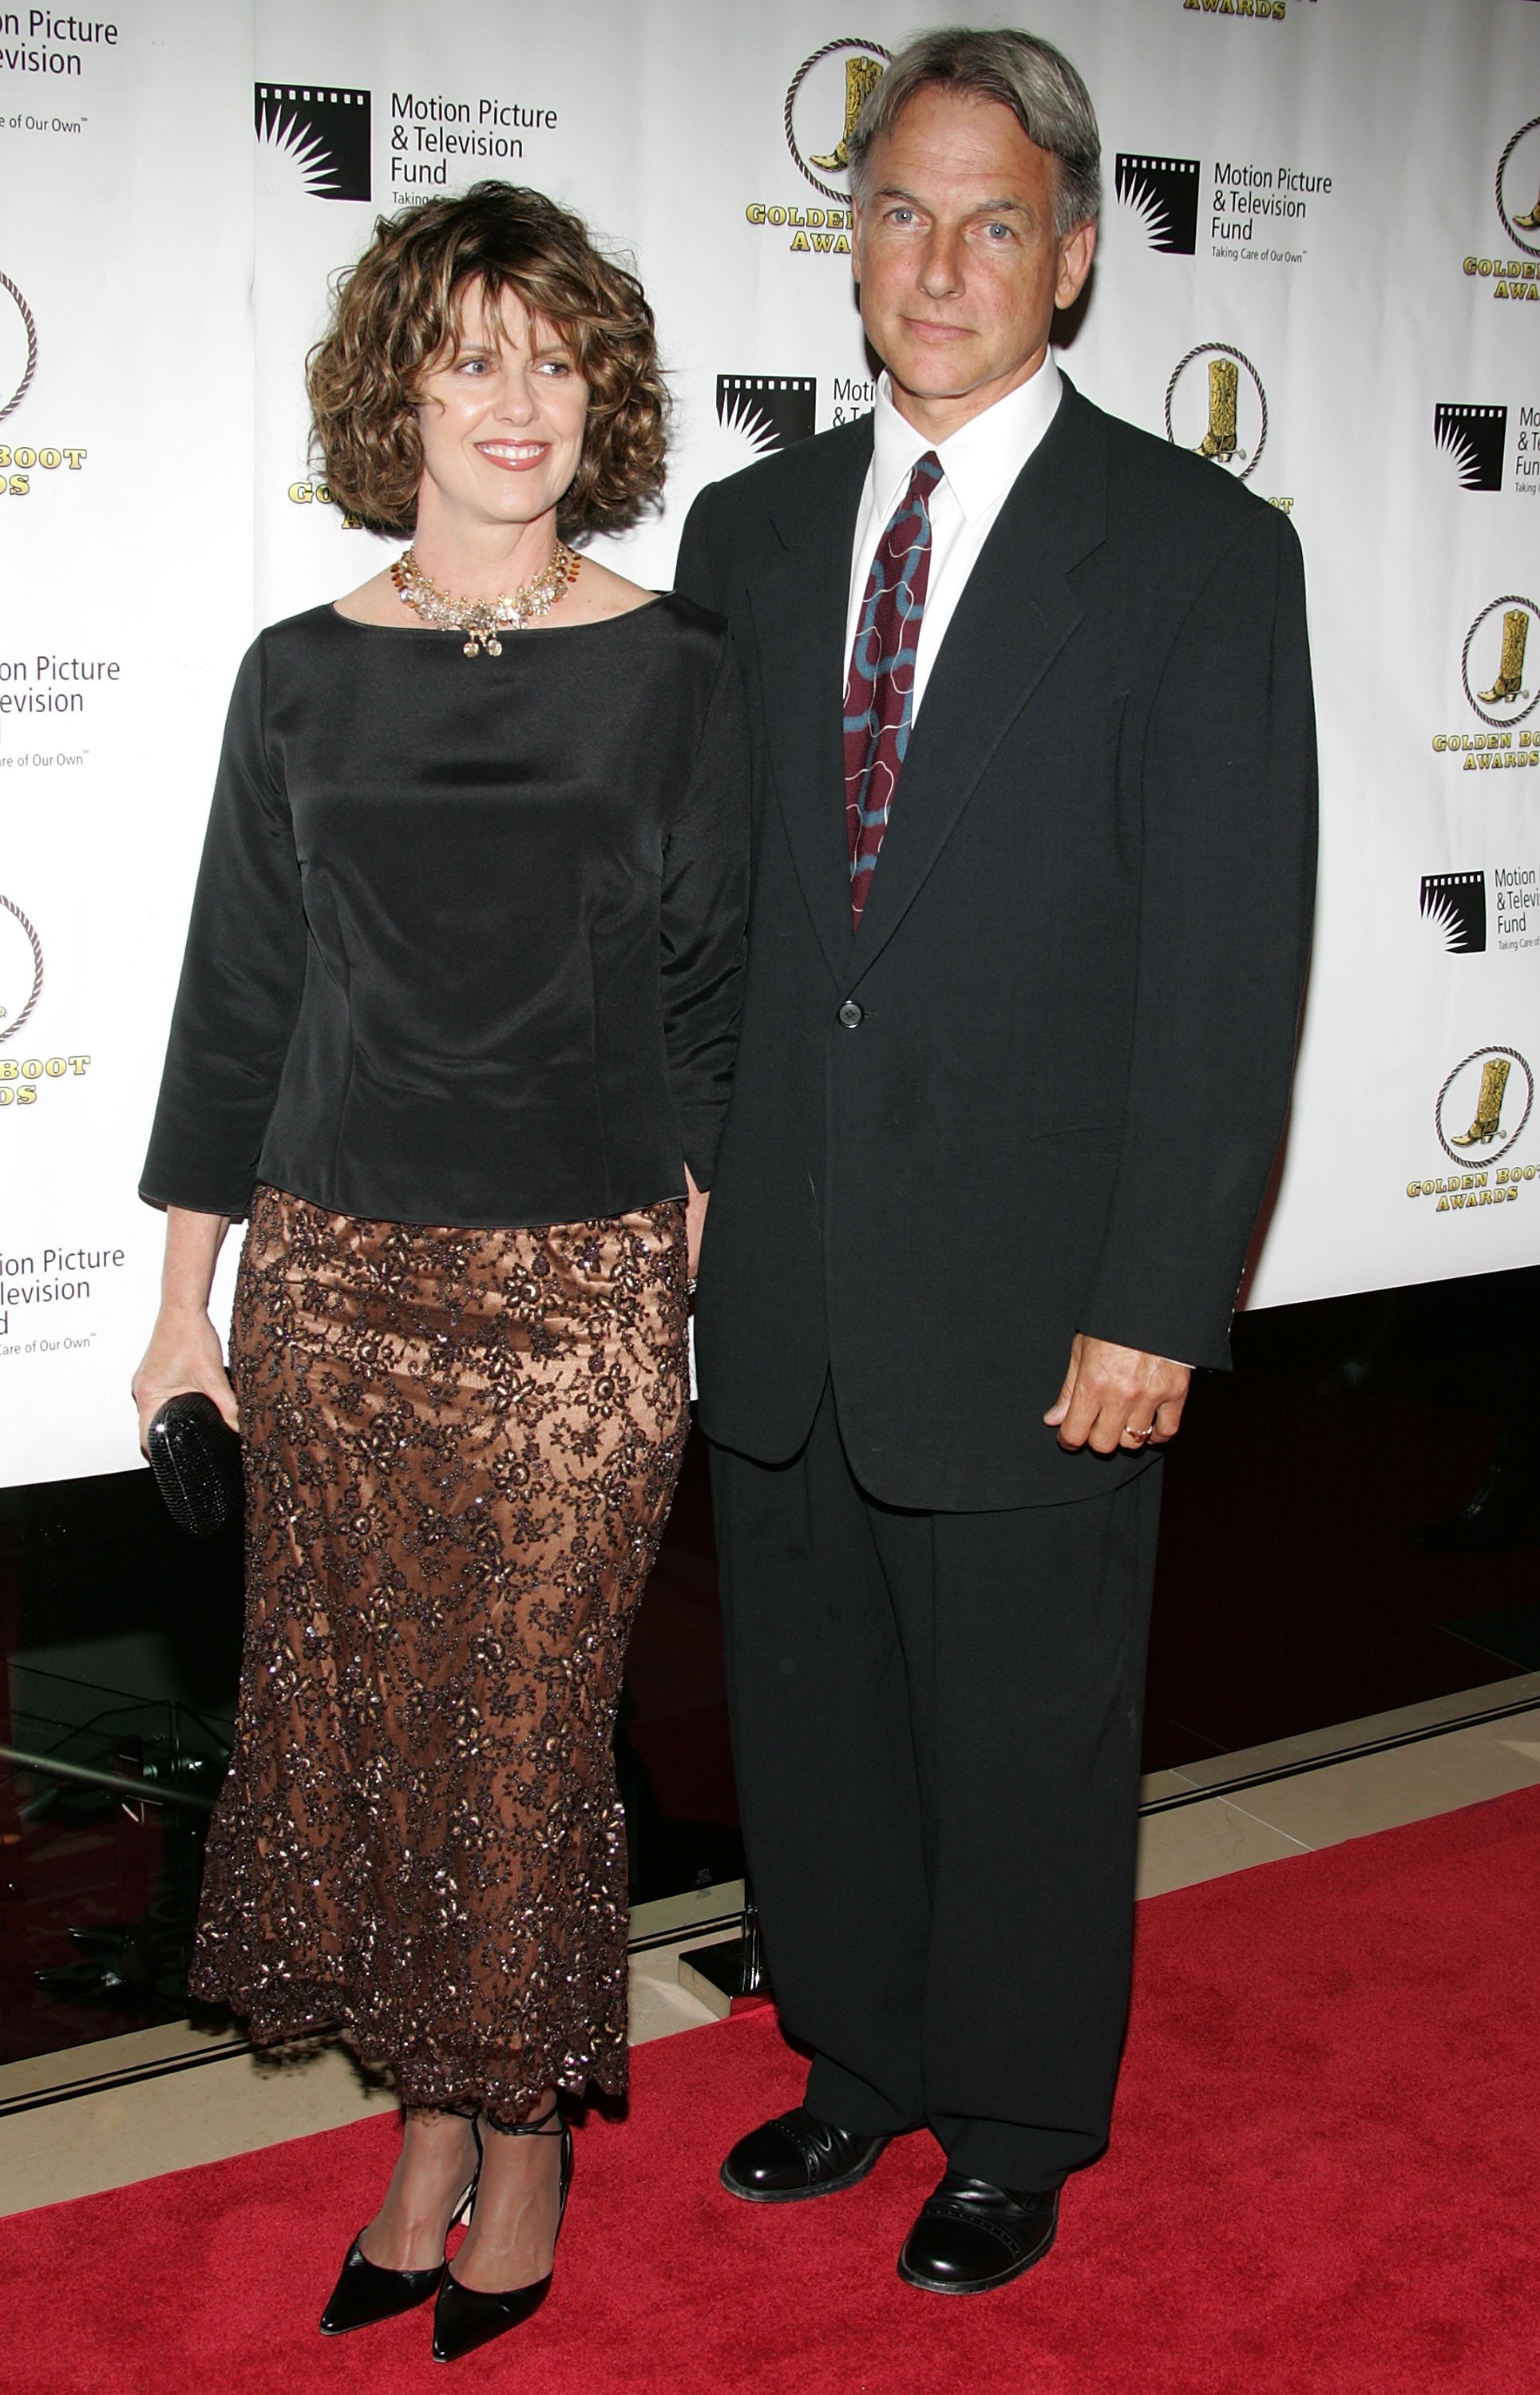 Mark Harmon and Pam Dawber at the Beverly Hilton Hotel on August 13, 2005 in Beverly Hills, California. | Photo: Getty Images